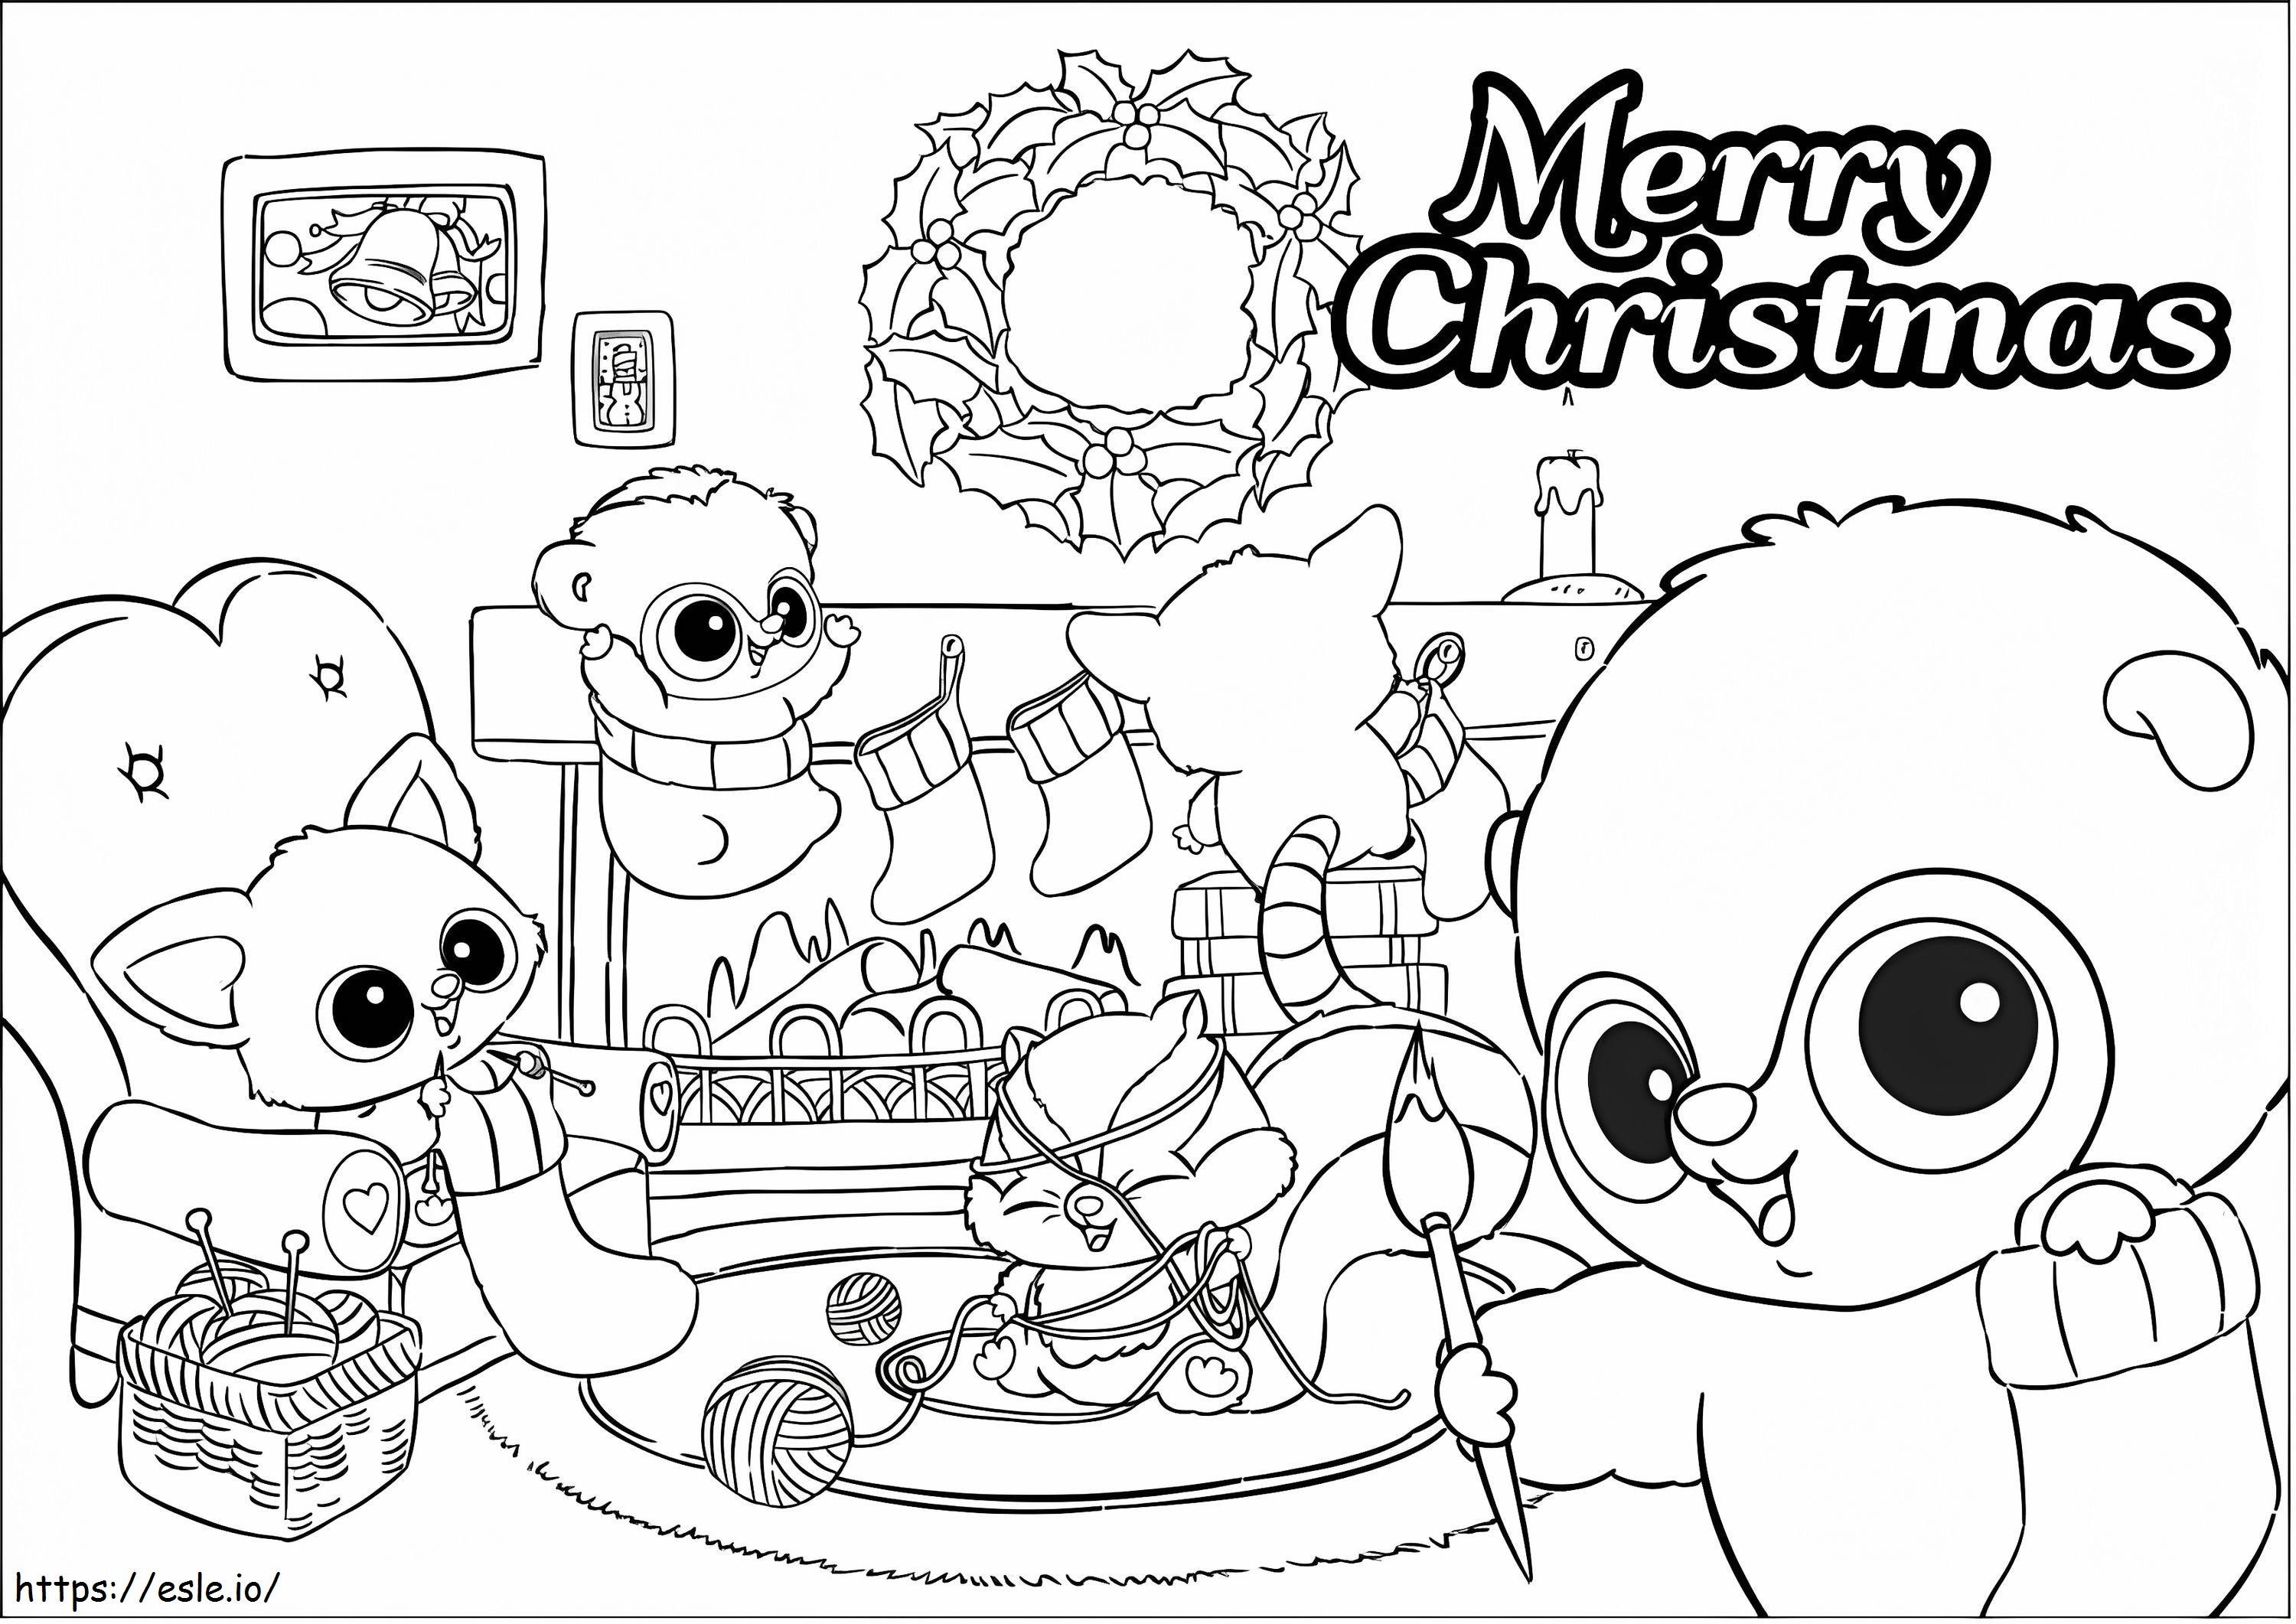 YooHoo And Friends Merry Christmas coloring page